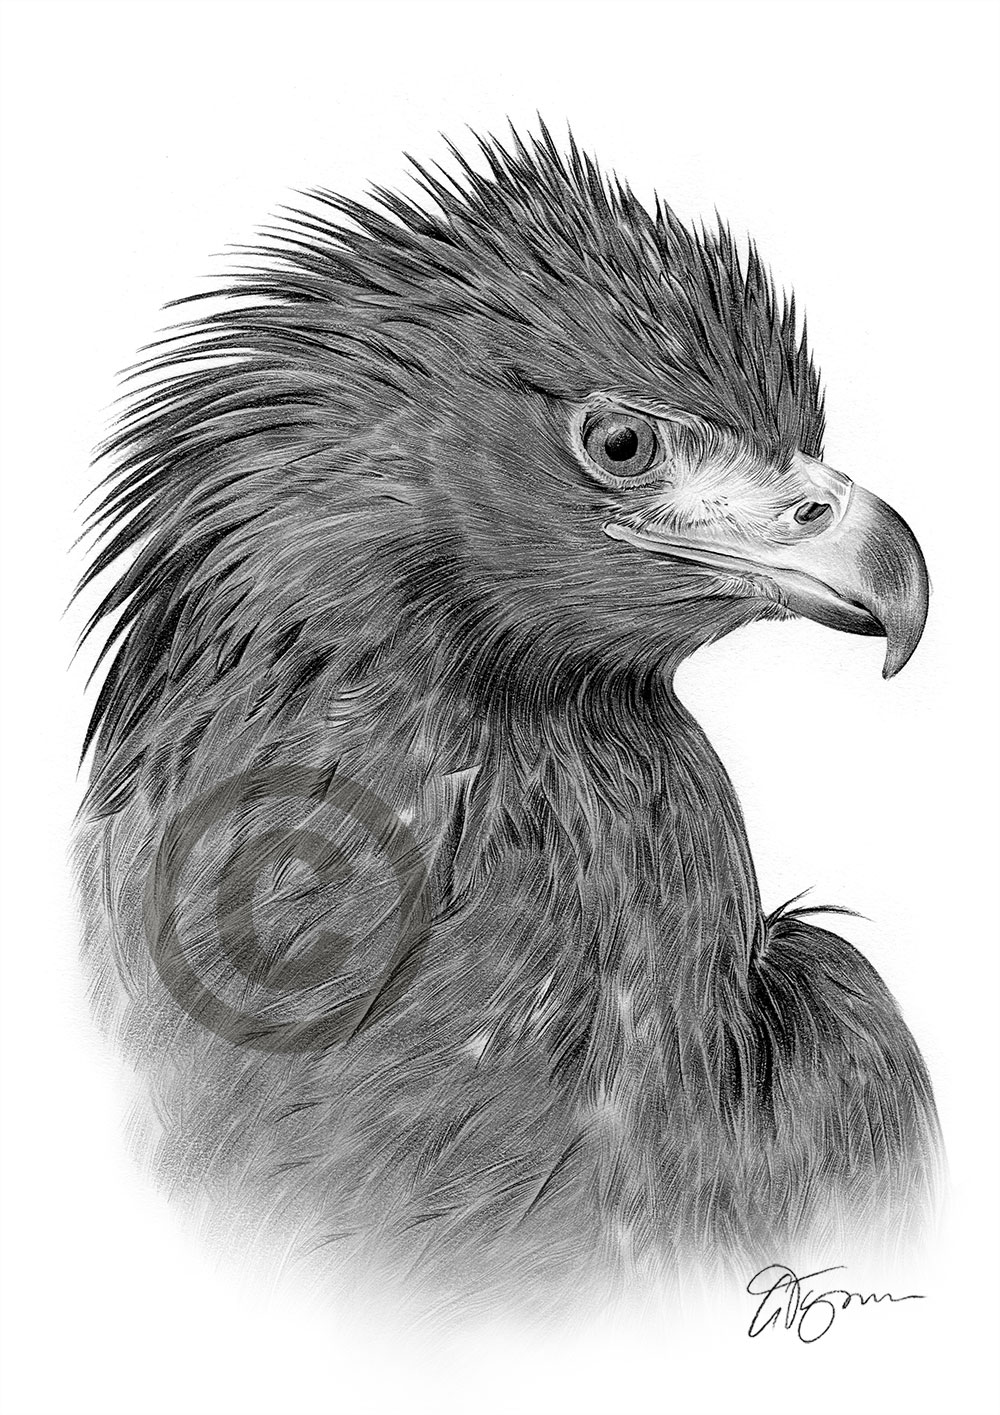 Pencil drawing portrait of a golden eagle by artist Gary Tymon